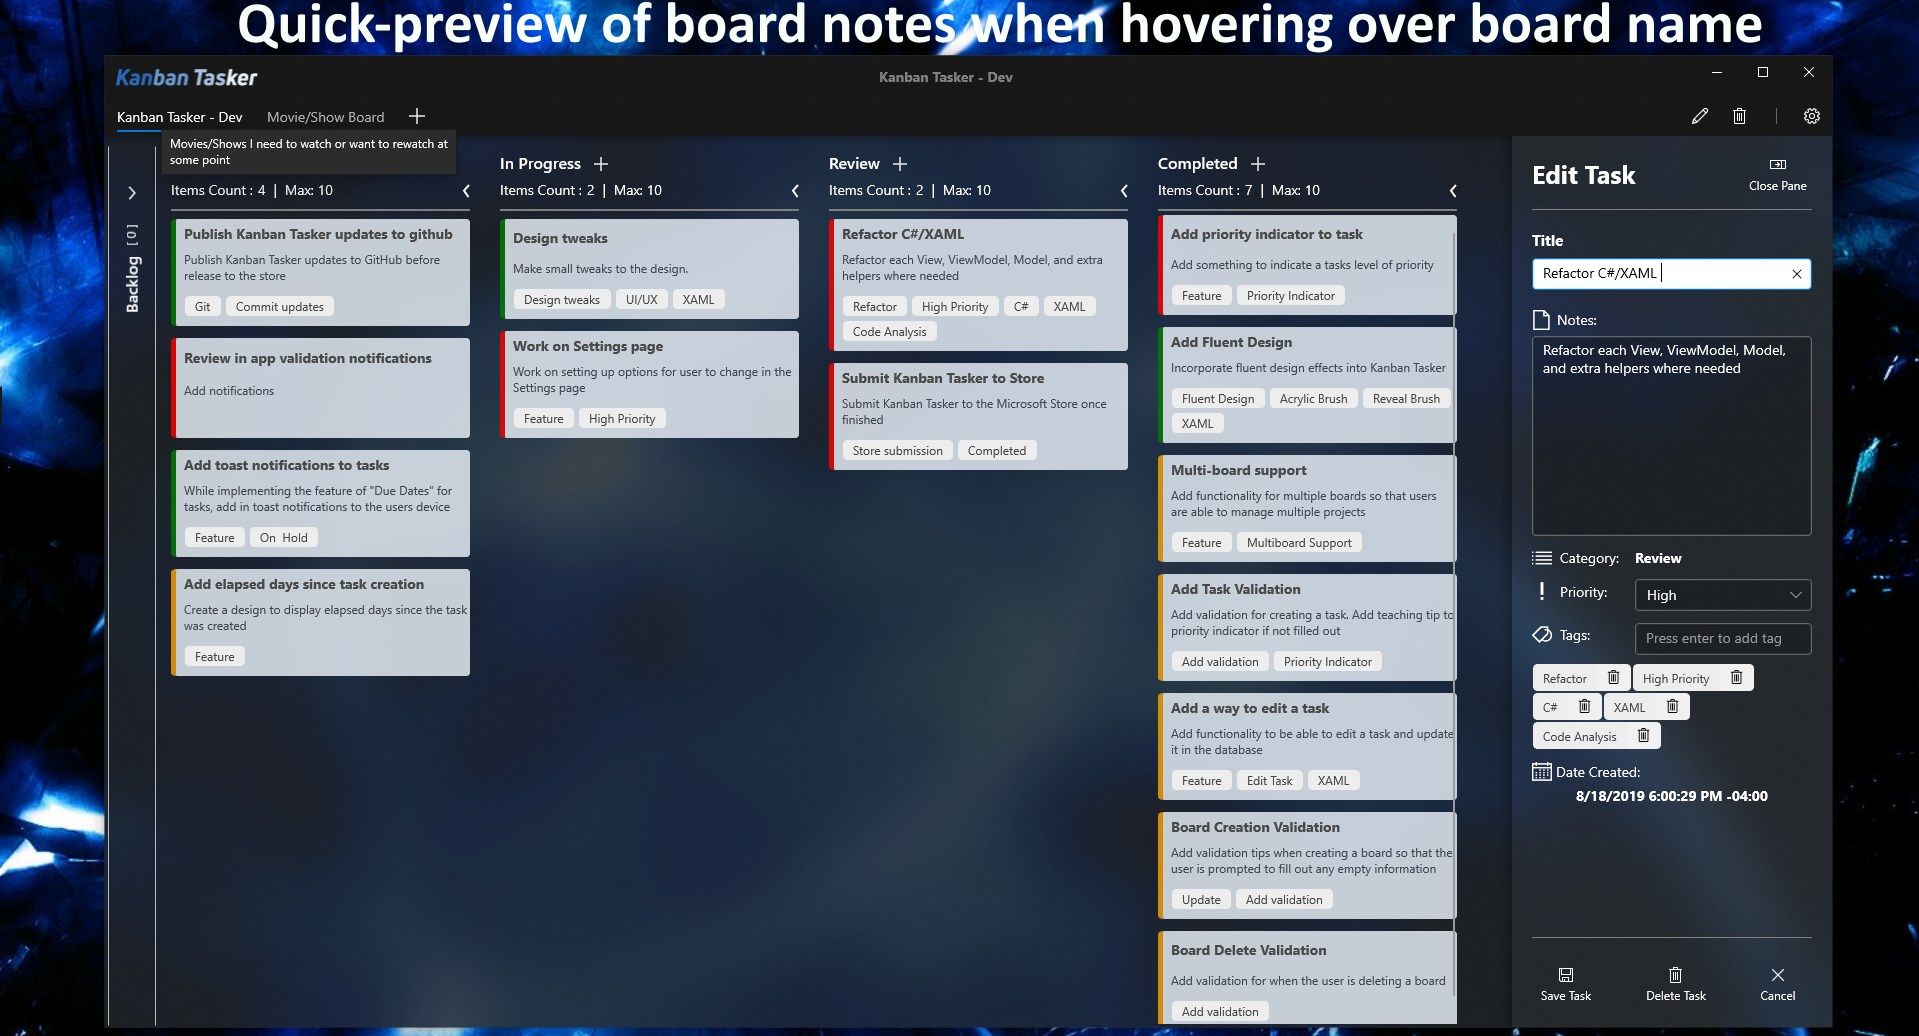 Quickly preview the notes for any board by hovering over it's menu item on the navigation menu